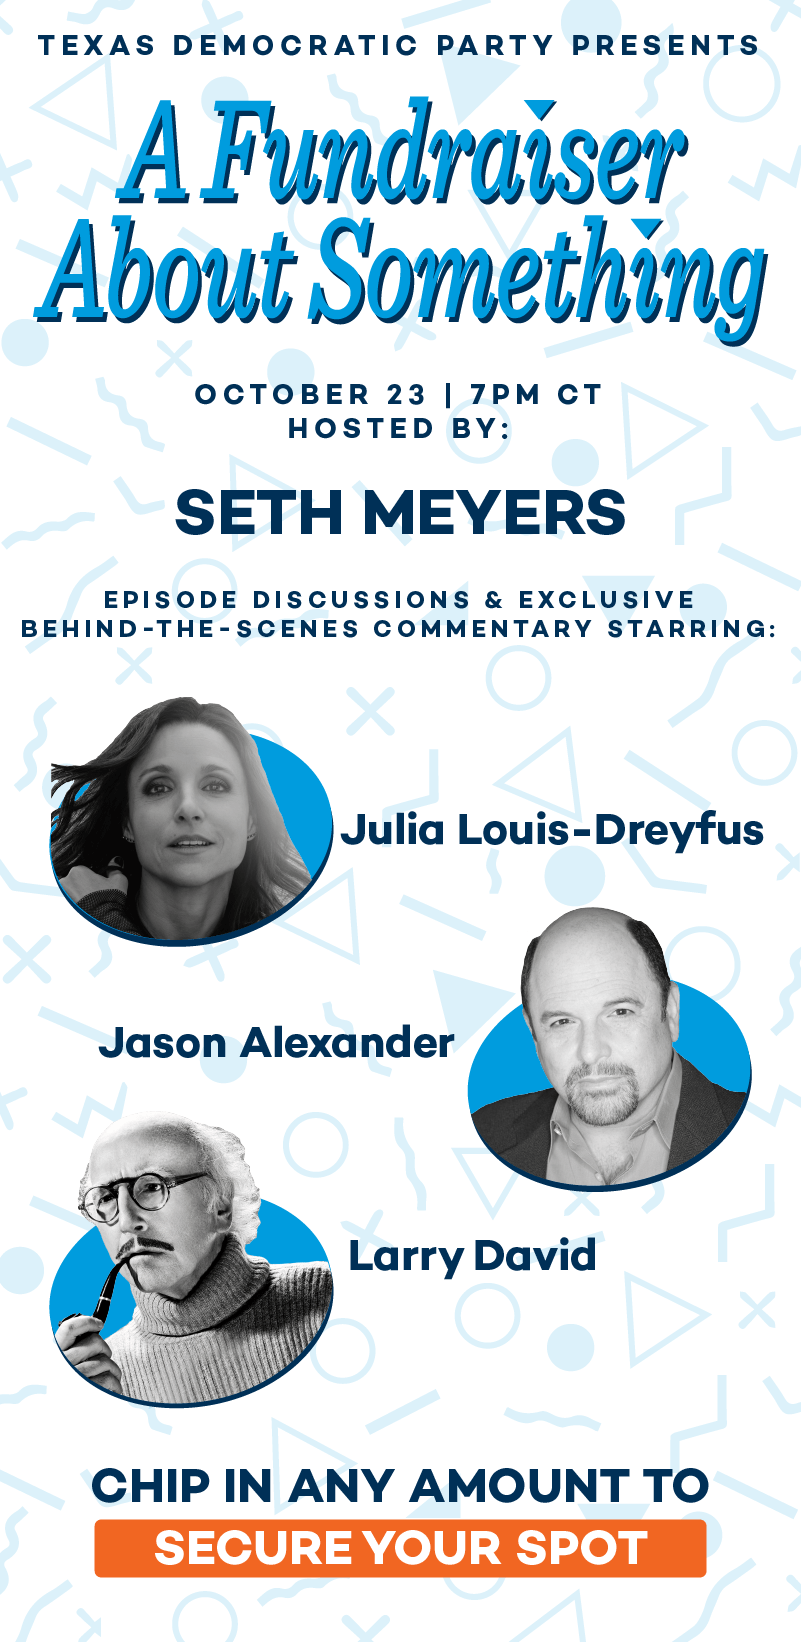 Texas Democratic Party presents A Fundraiser About Something. October 23 | 7PM CT. Hosted by: Seth Meyers | Script reading starring: Julia Louis-Dreyfus, Jason Alexander, and Larry David. Secure your spot!